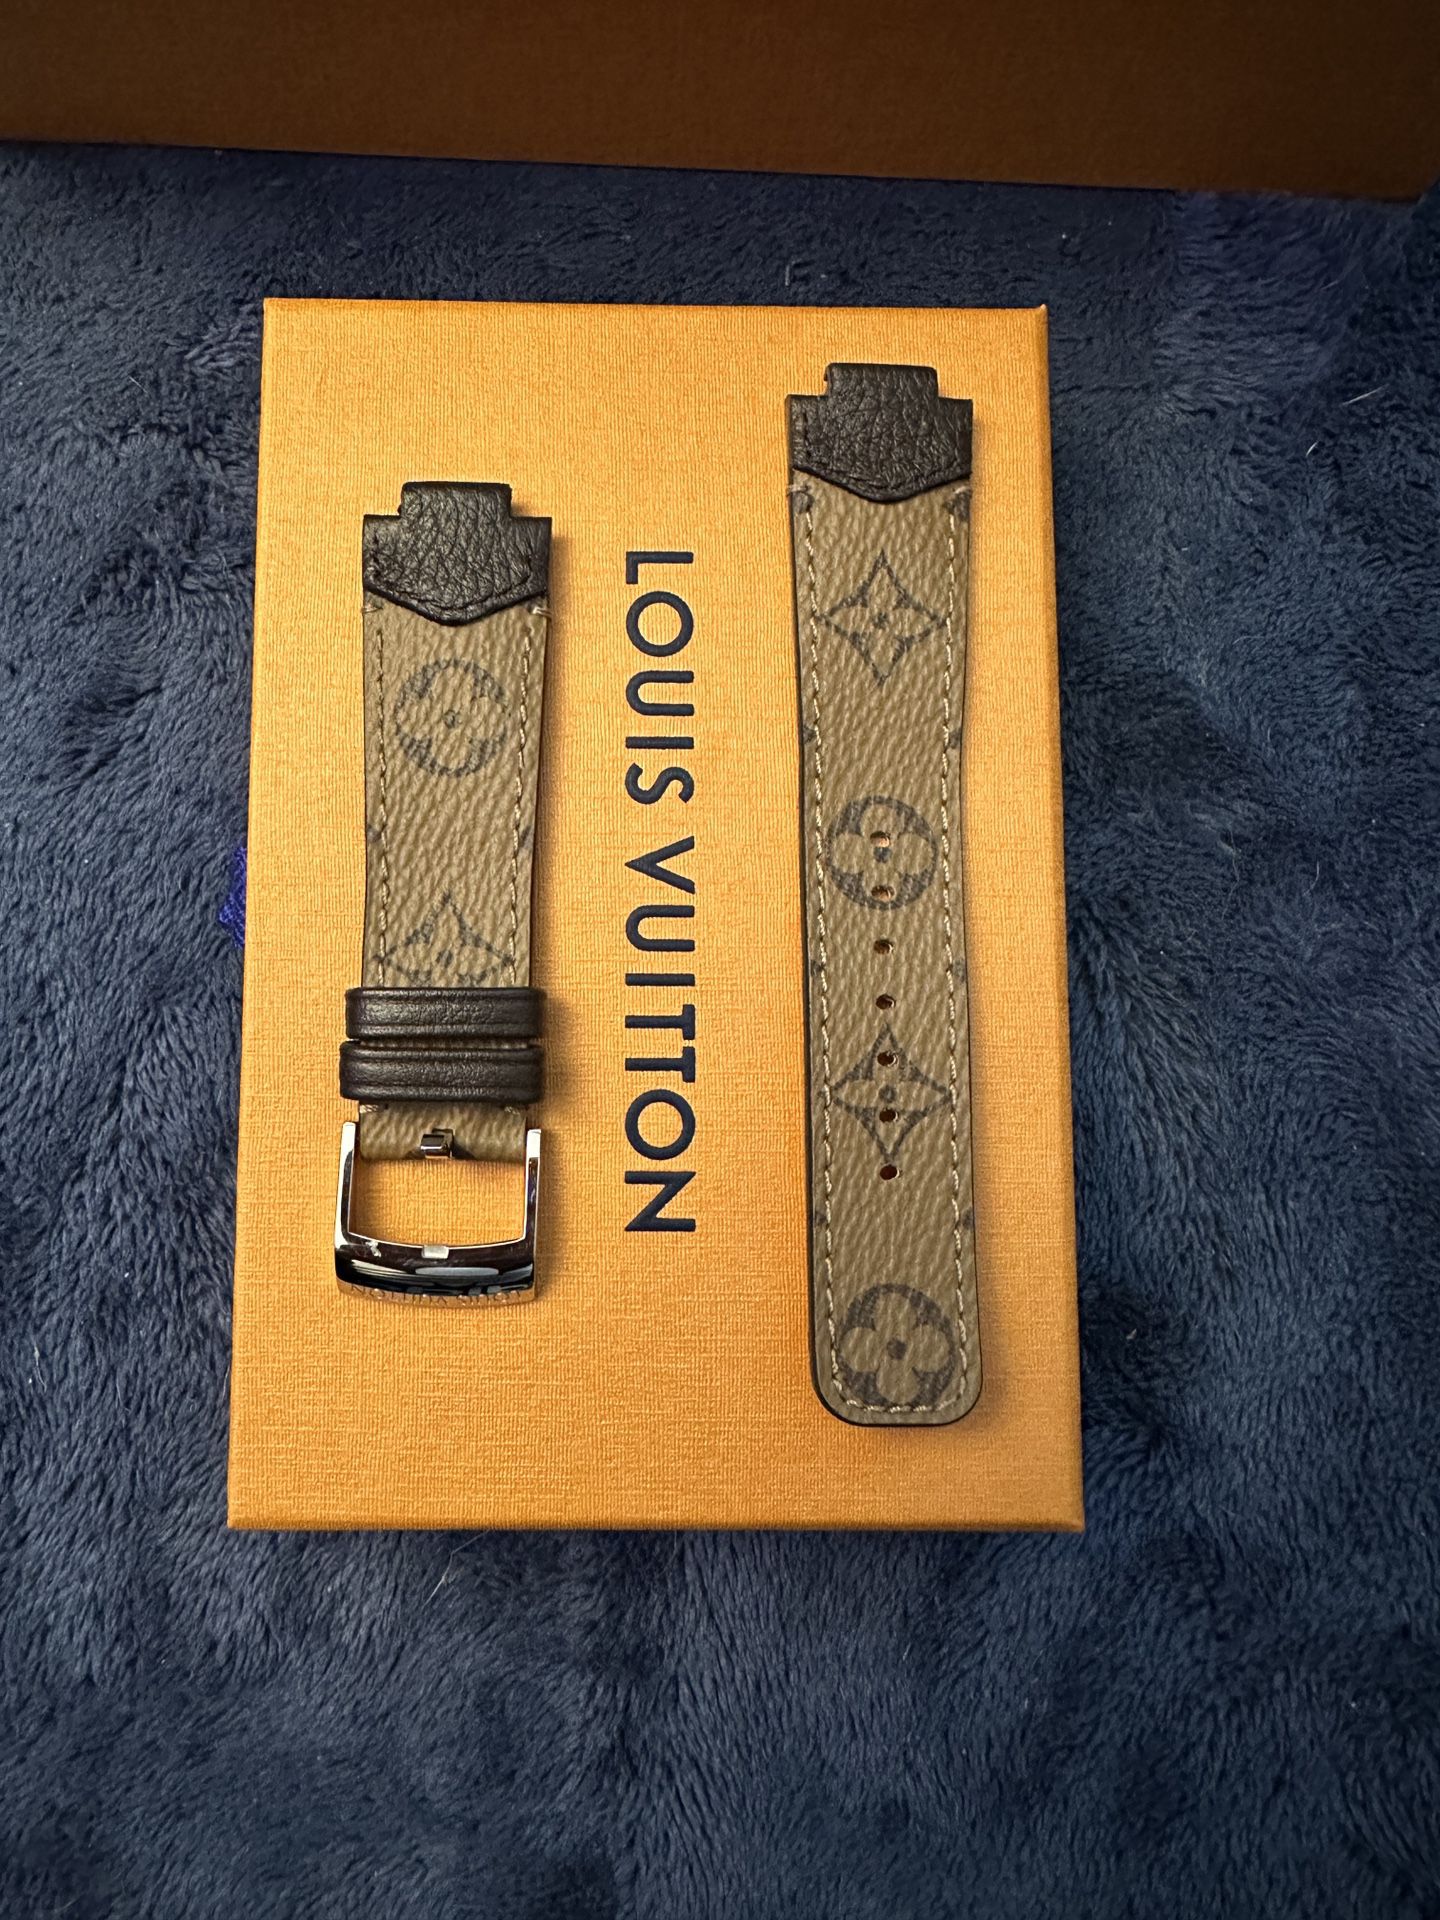 LV Louis Vuitton Tambour Horizon Light Up Connected Watch In Black With  Strap for Sale in Lake Forest, CA - OfferUp